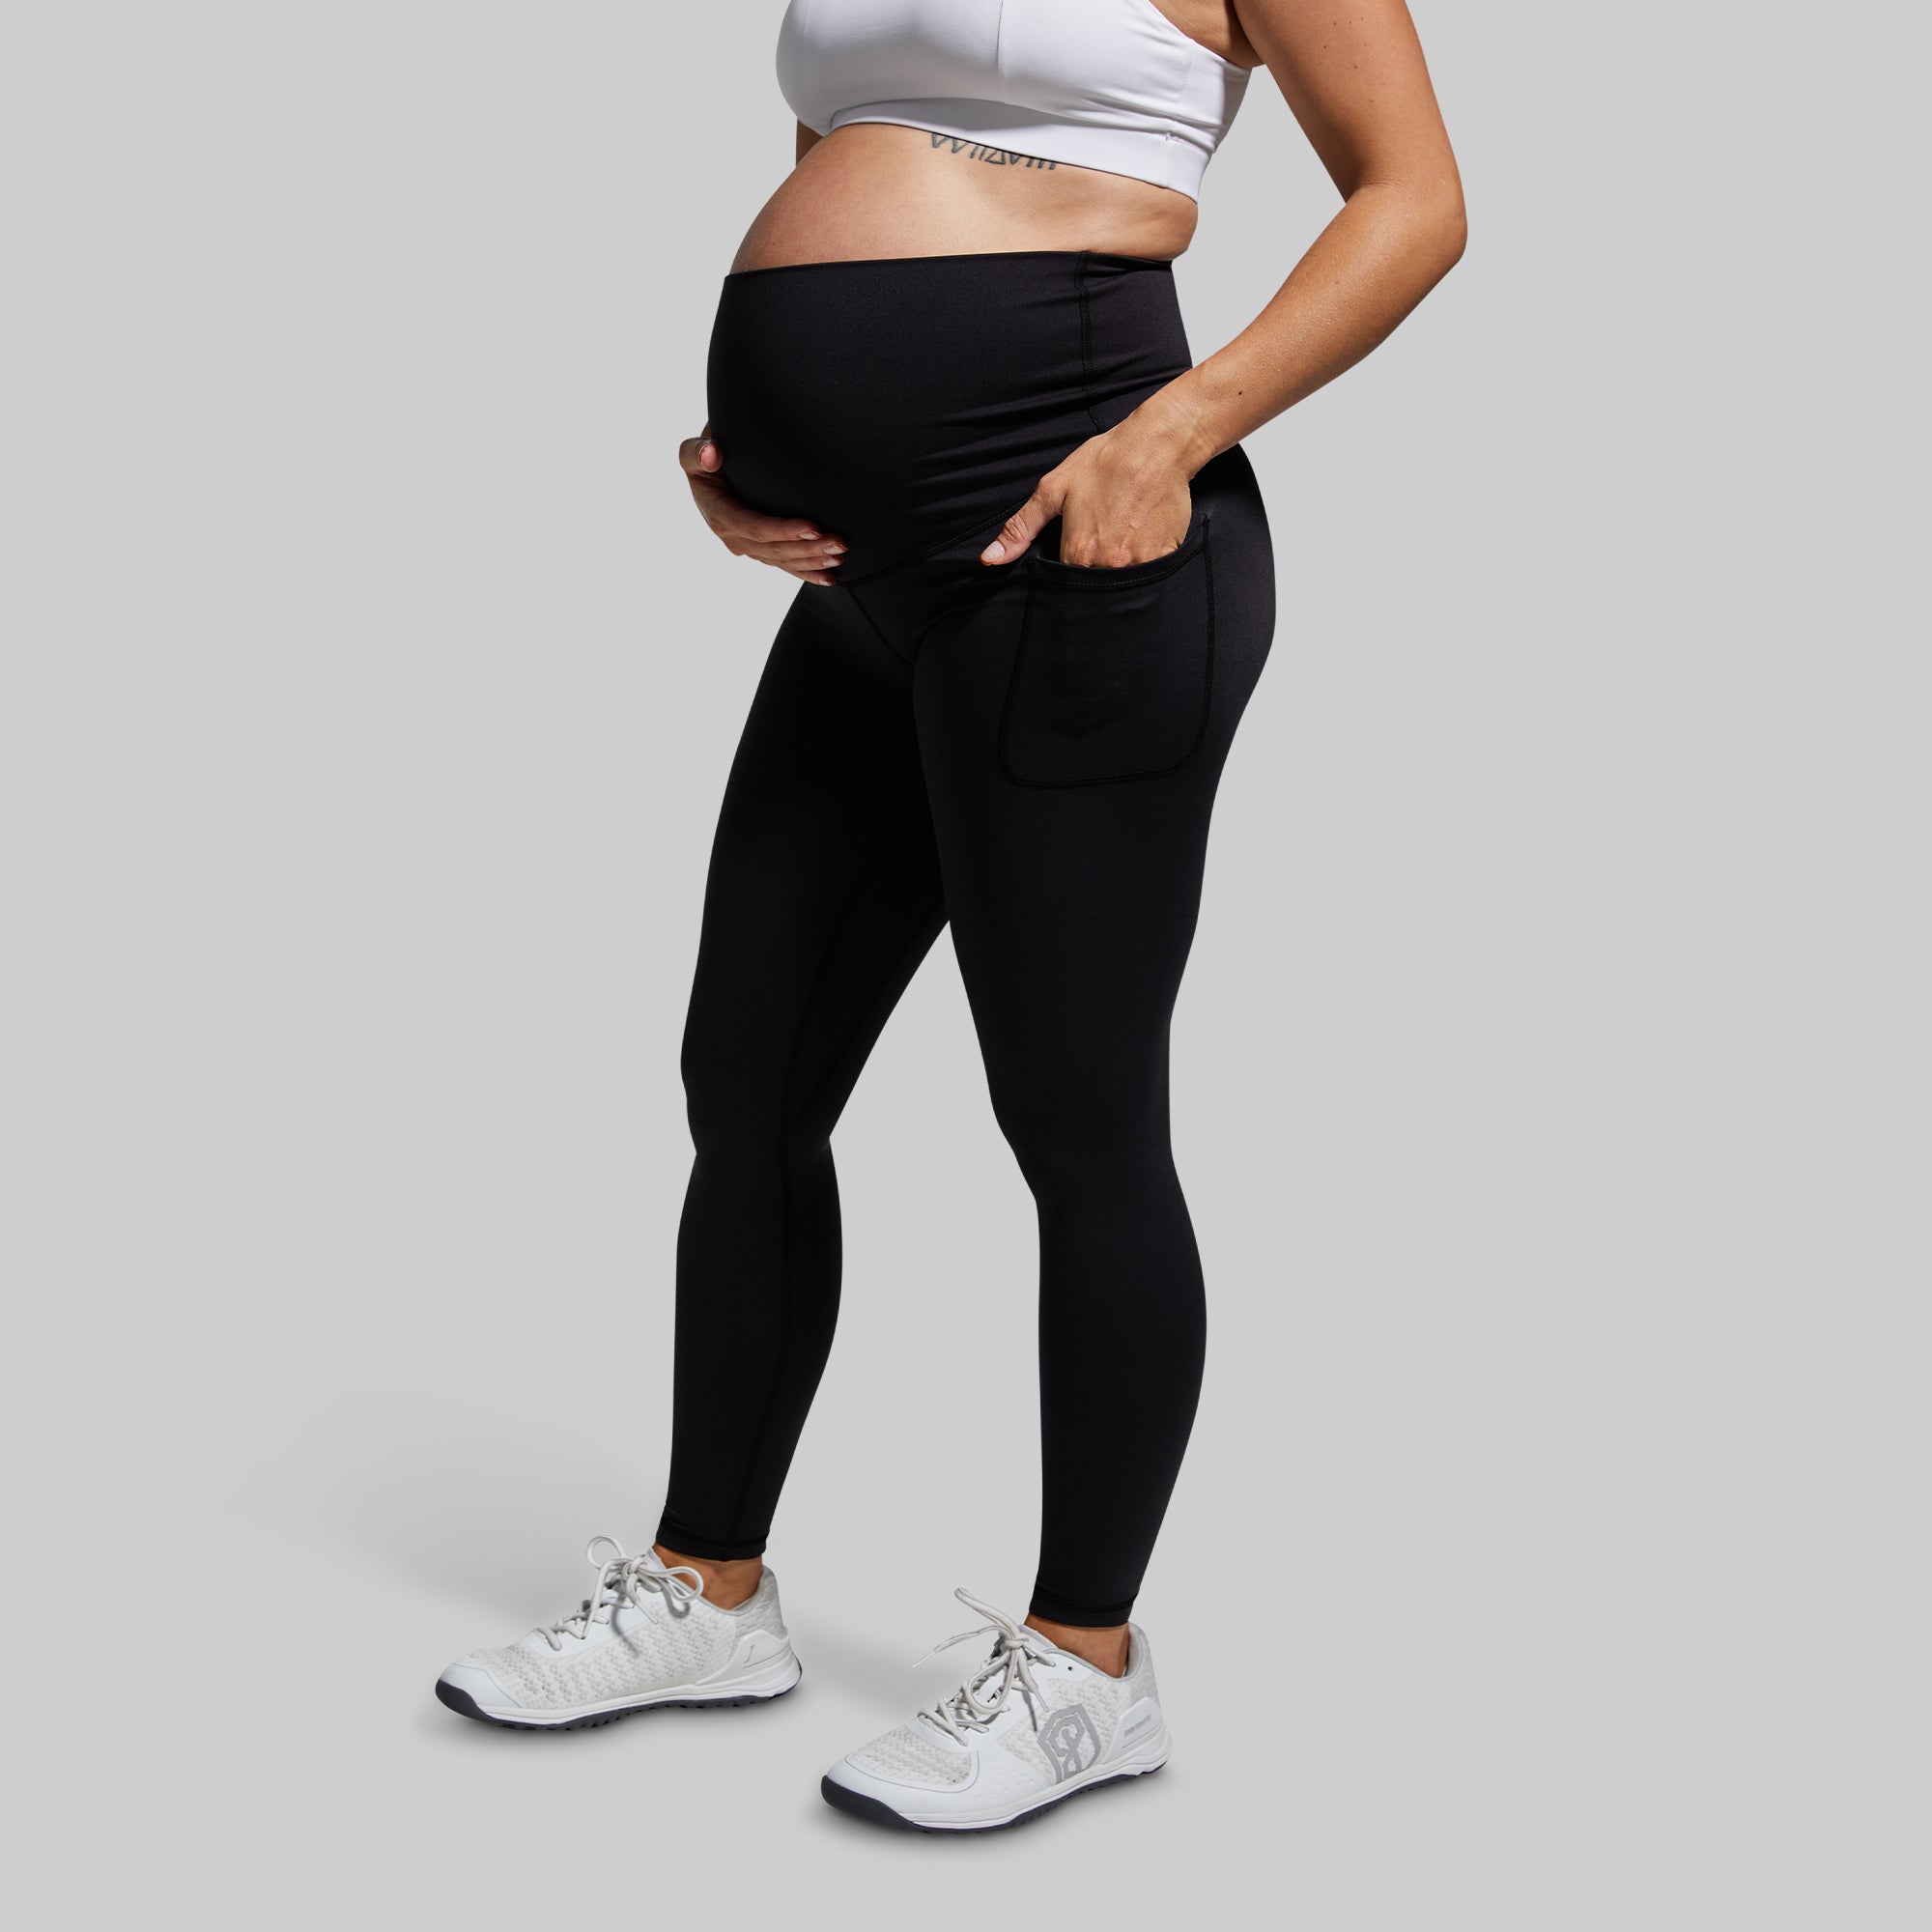 Black Maternity Sports Leggings with Pockets